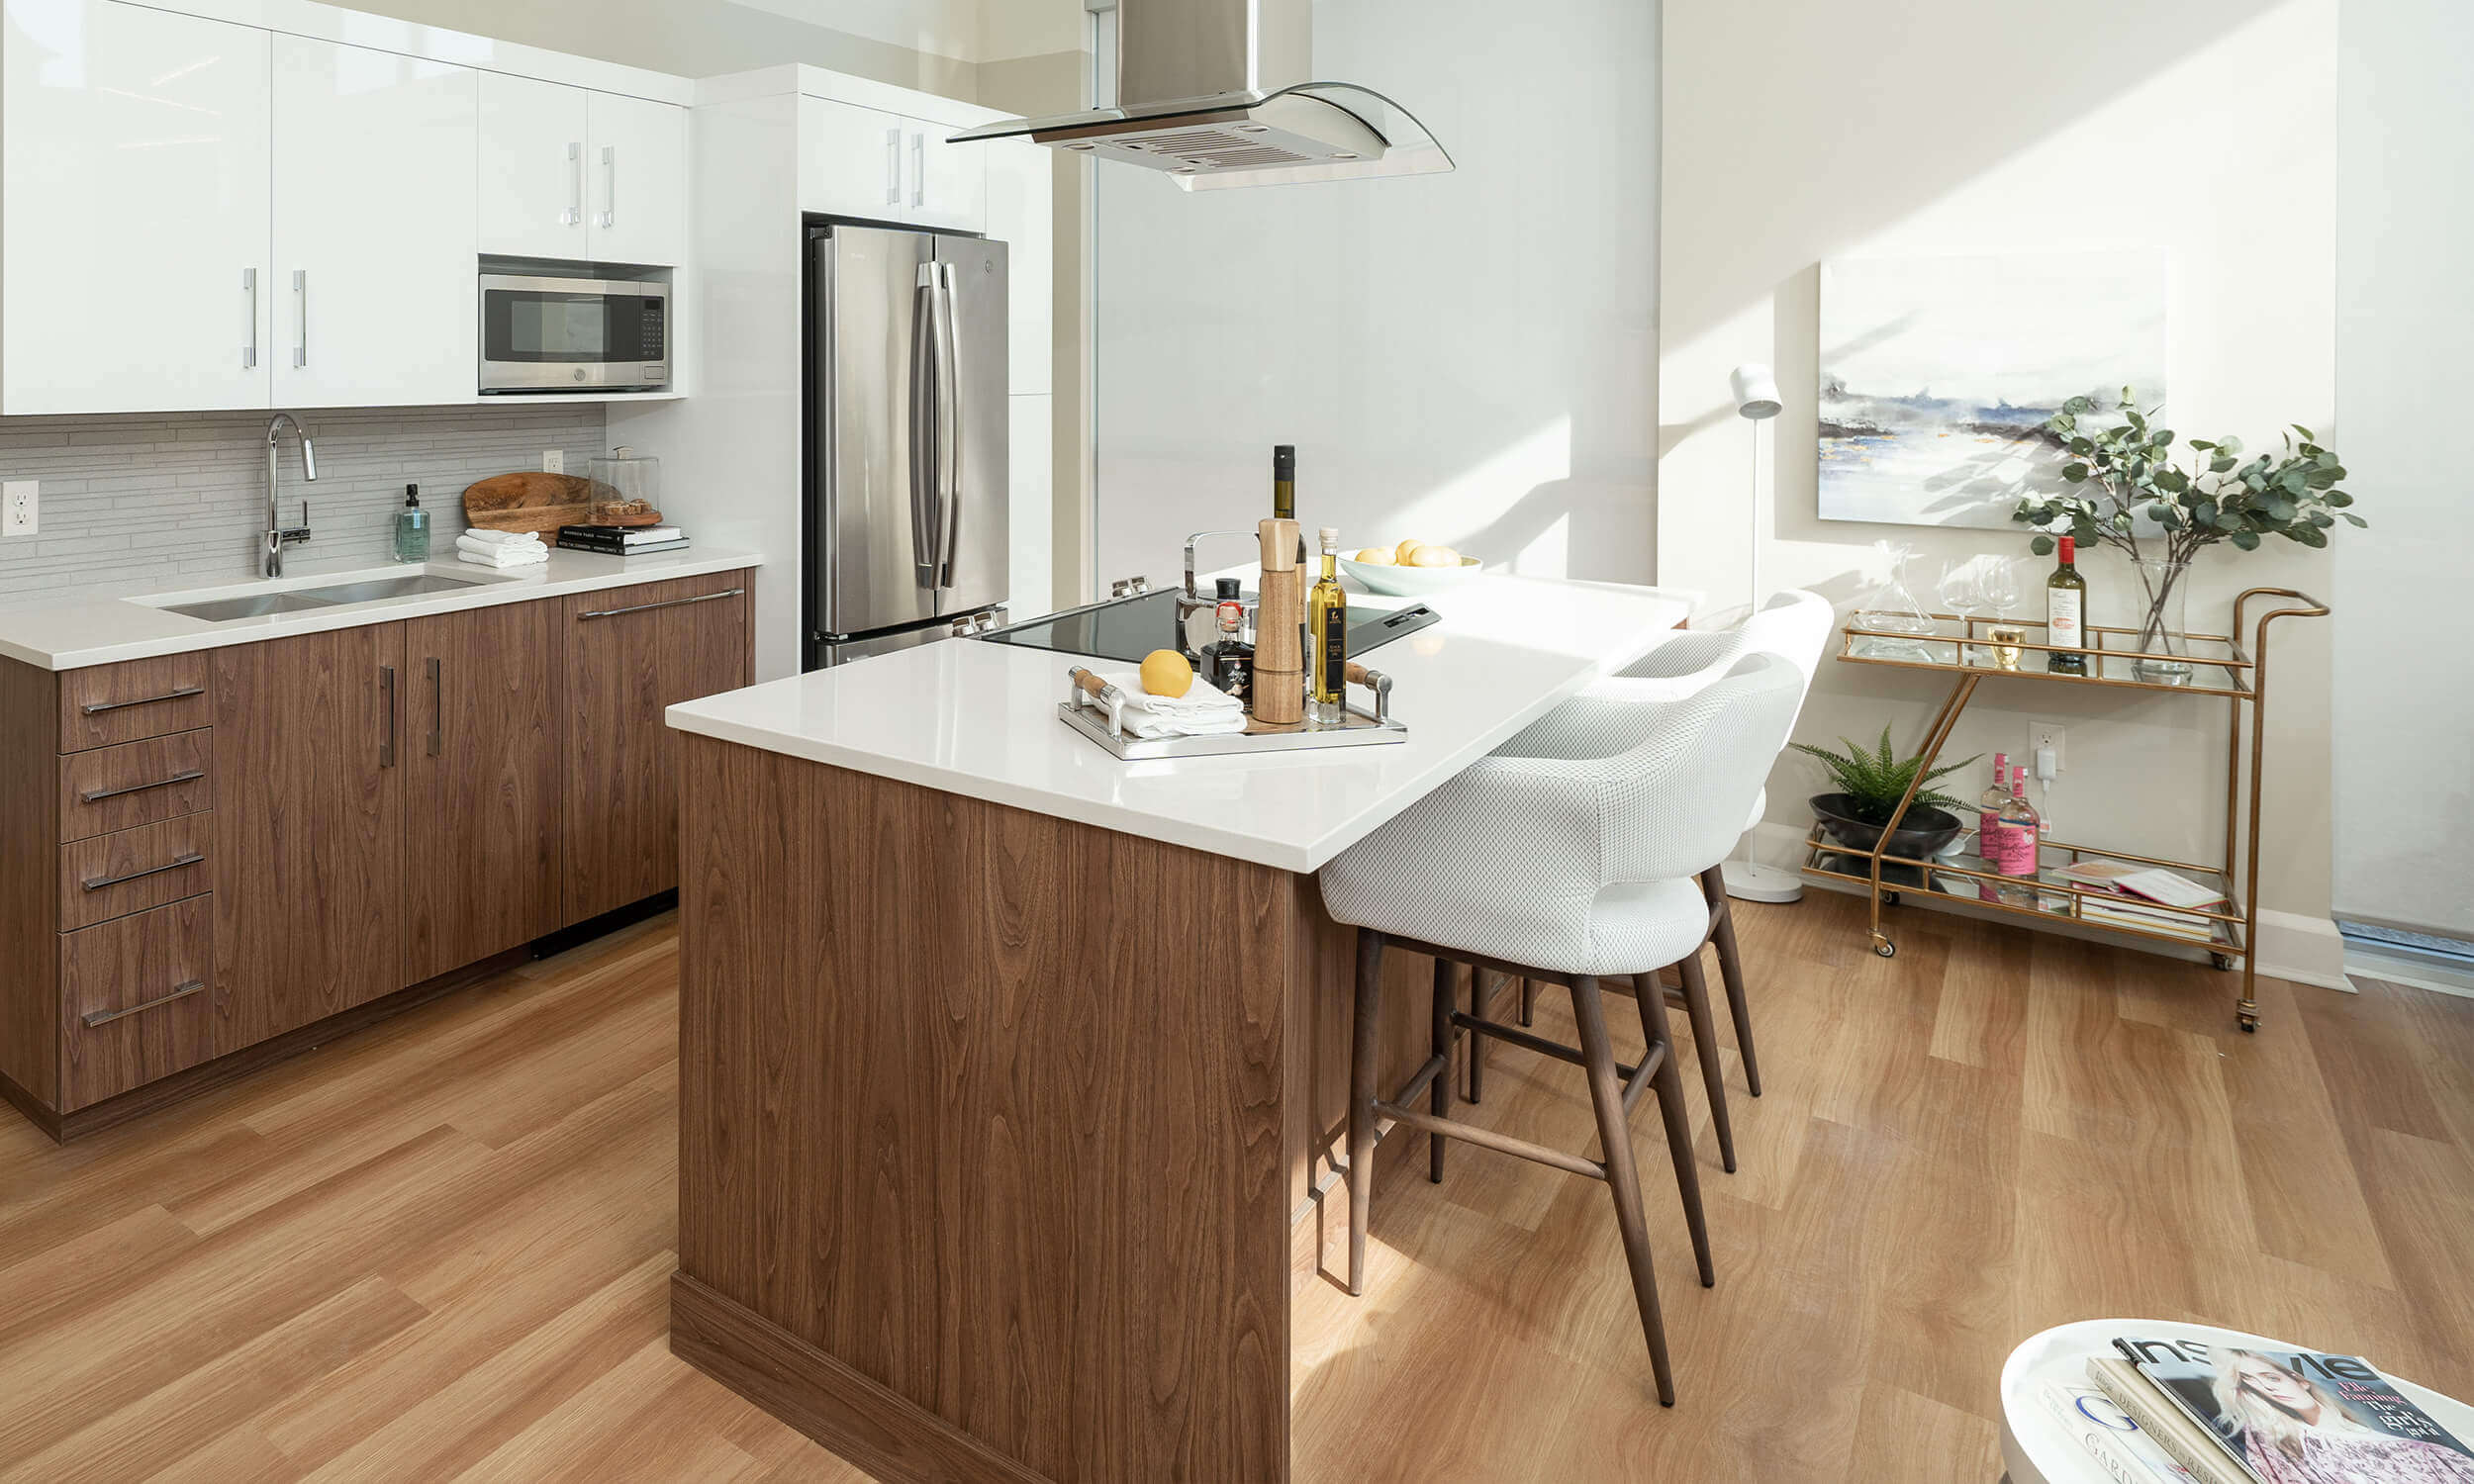 Modern-looking kitchen with white countertops and island with tall chairs and silver appliances